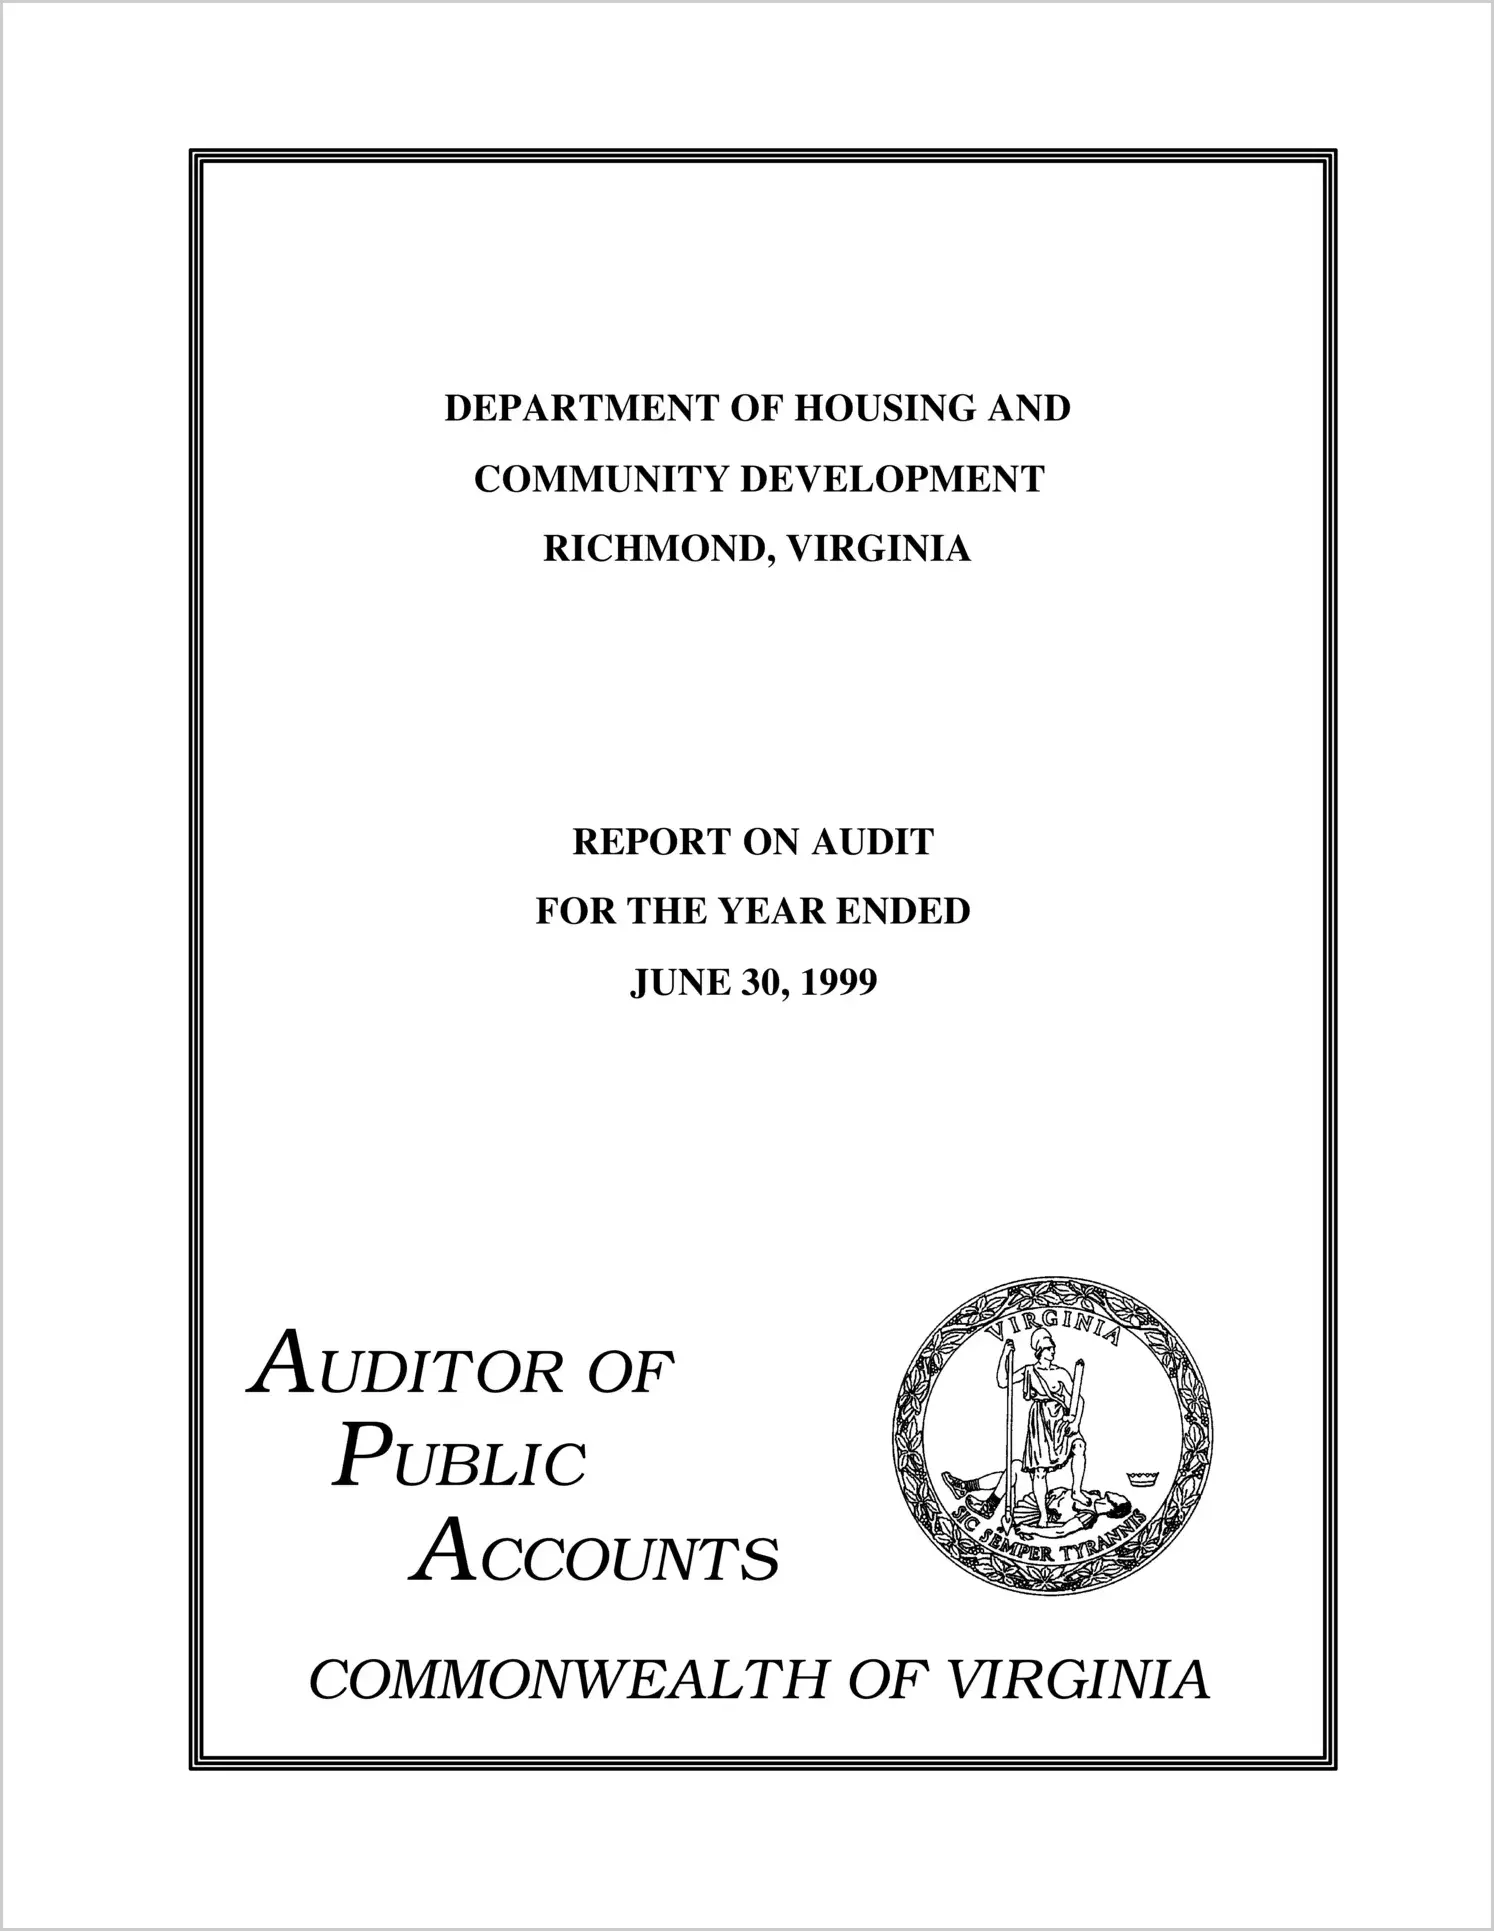 Department of Housing and Community Development for the year ended June 30, 1999